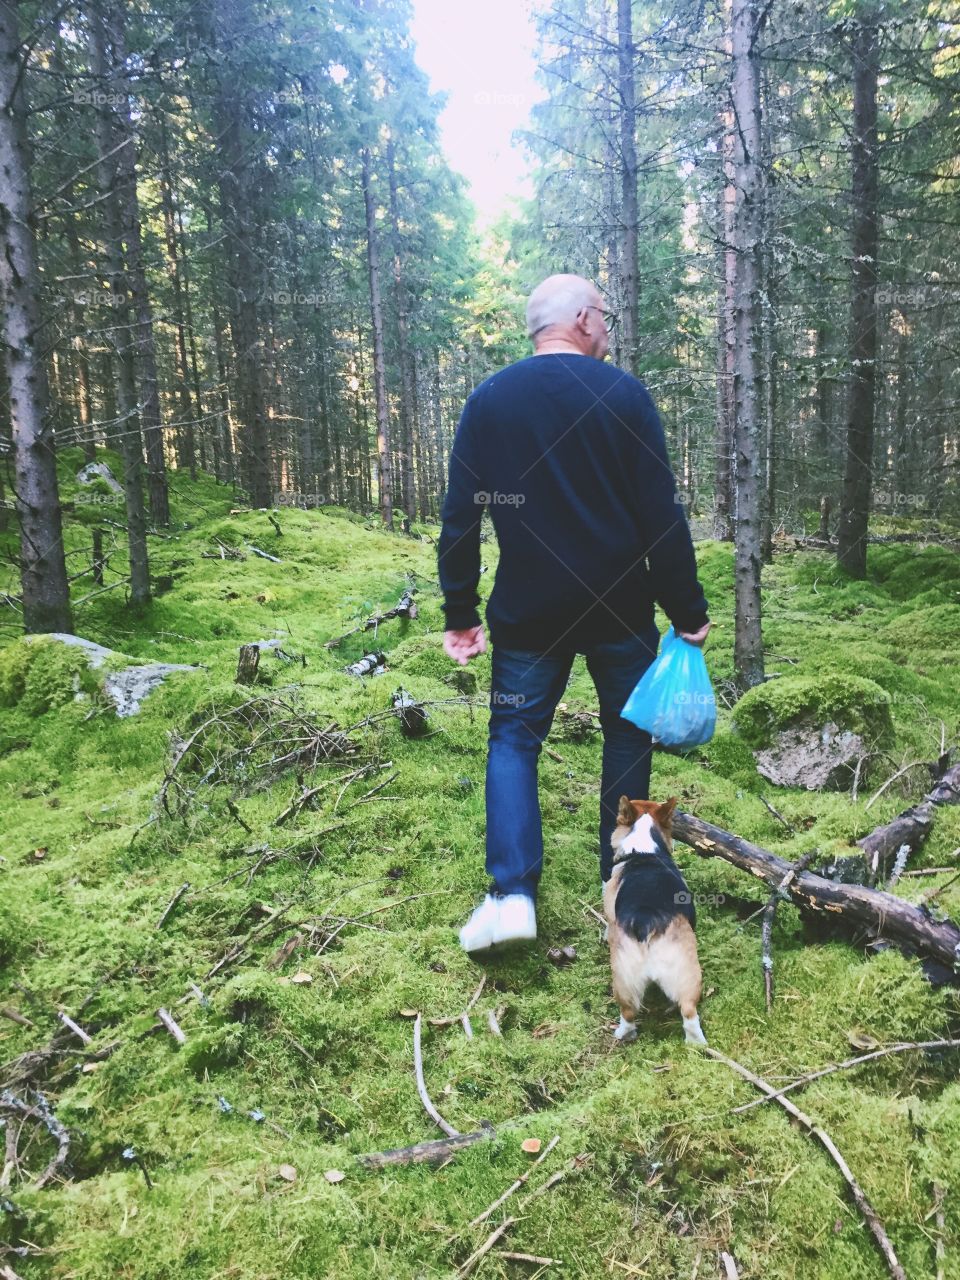 Man and a dog searching for mushrooms in the forest